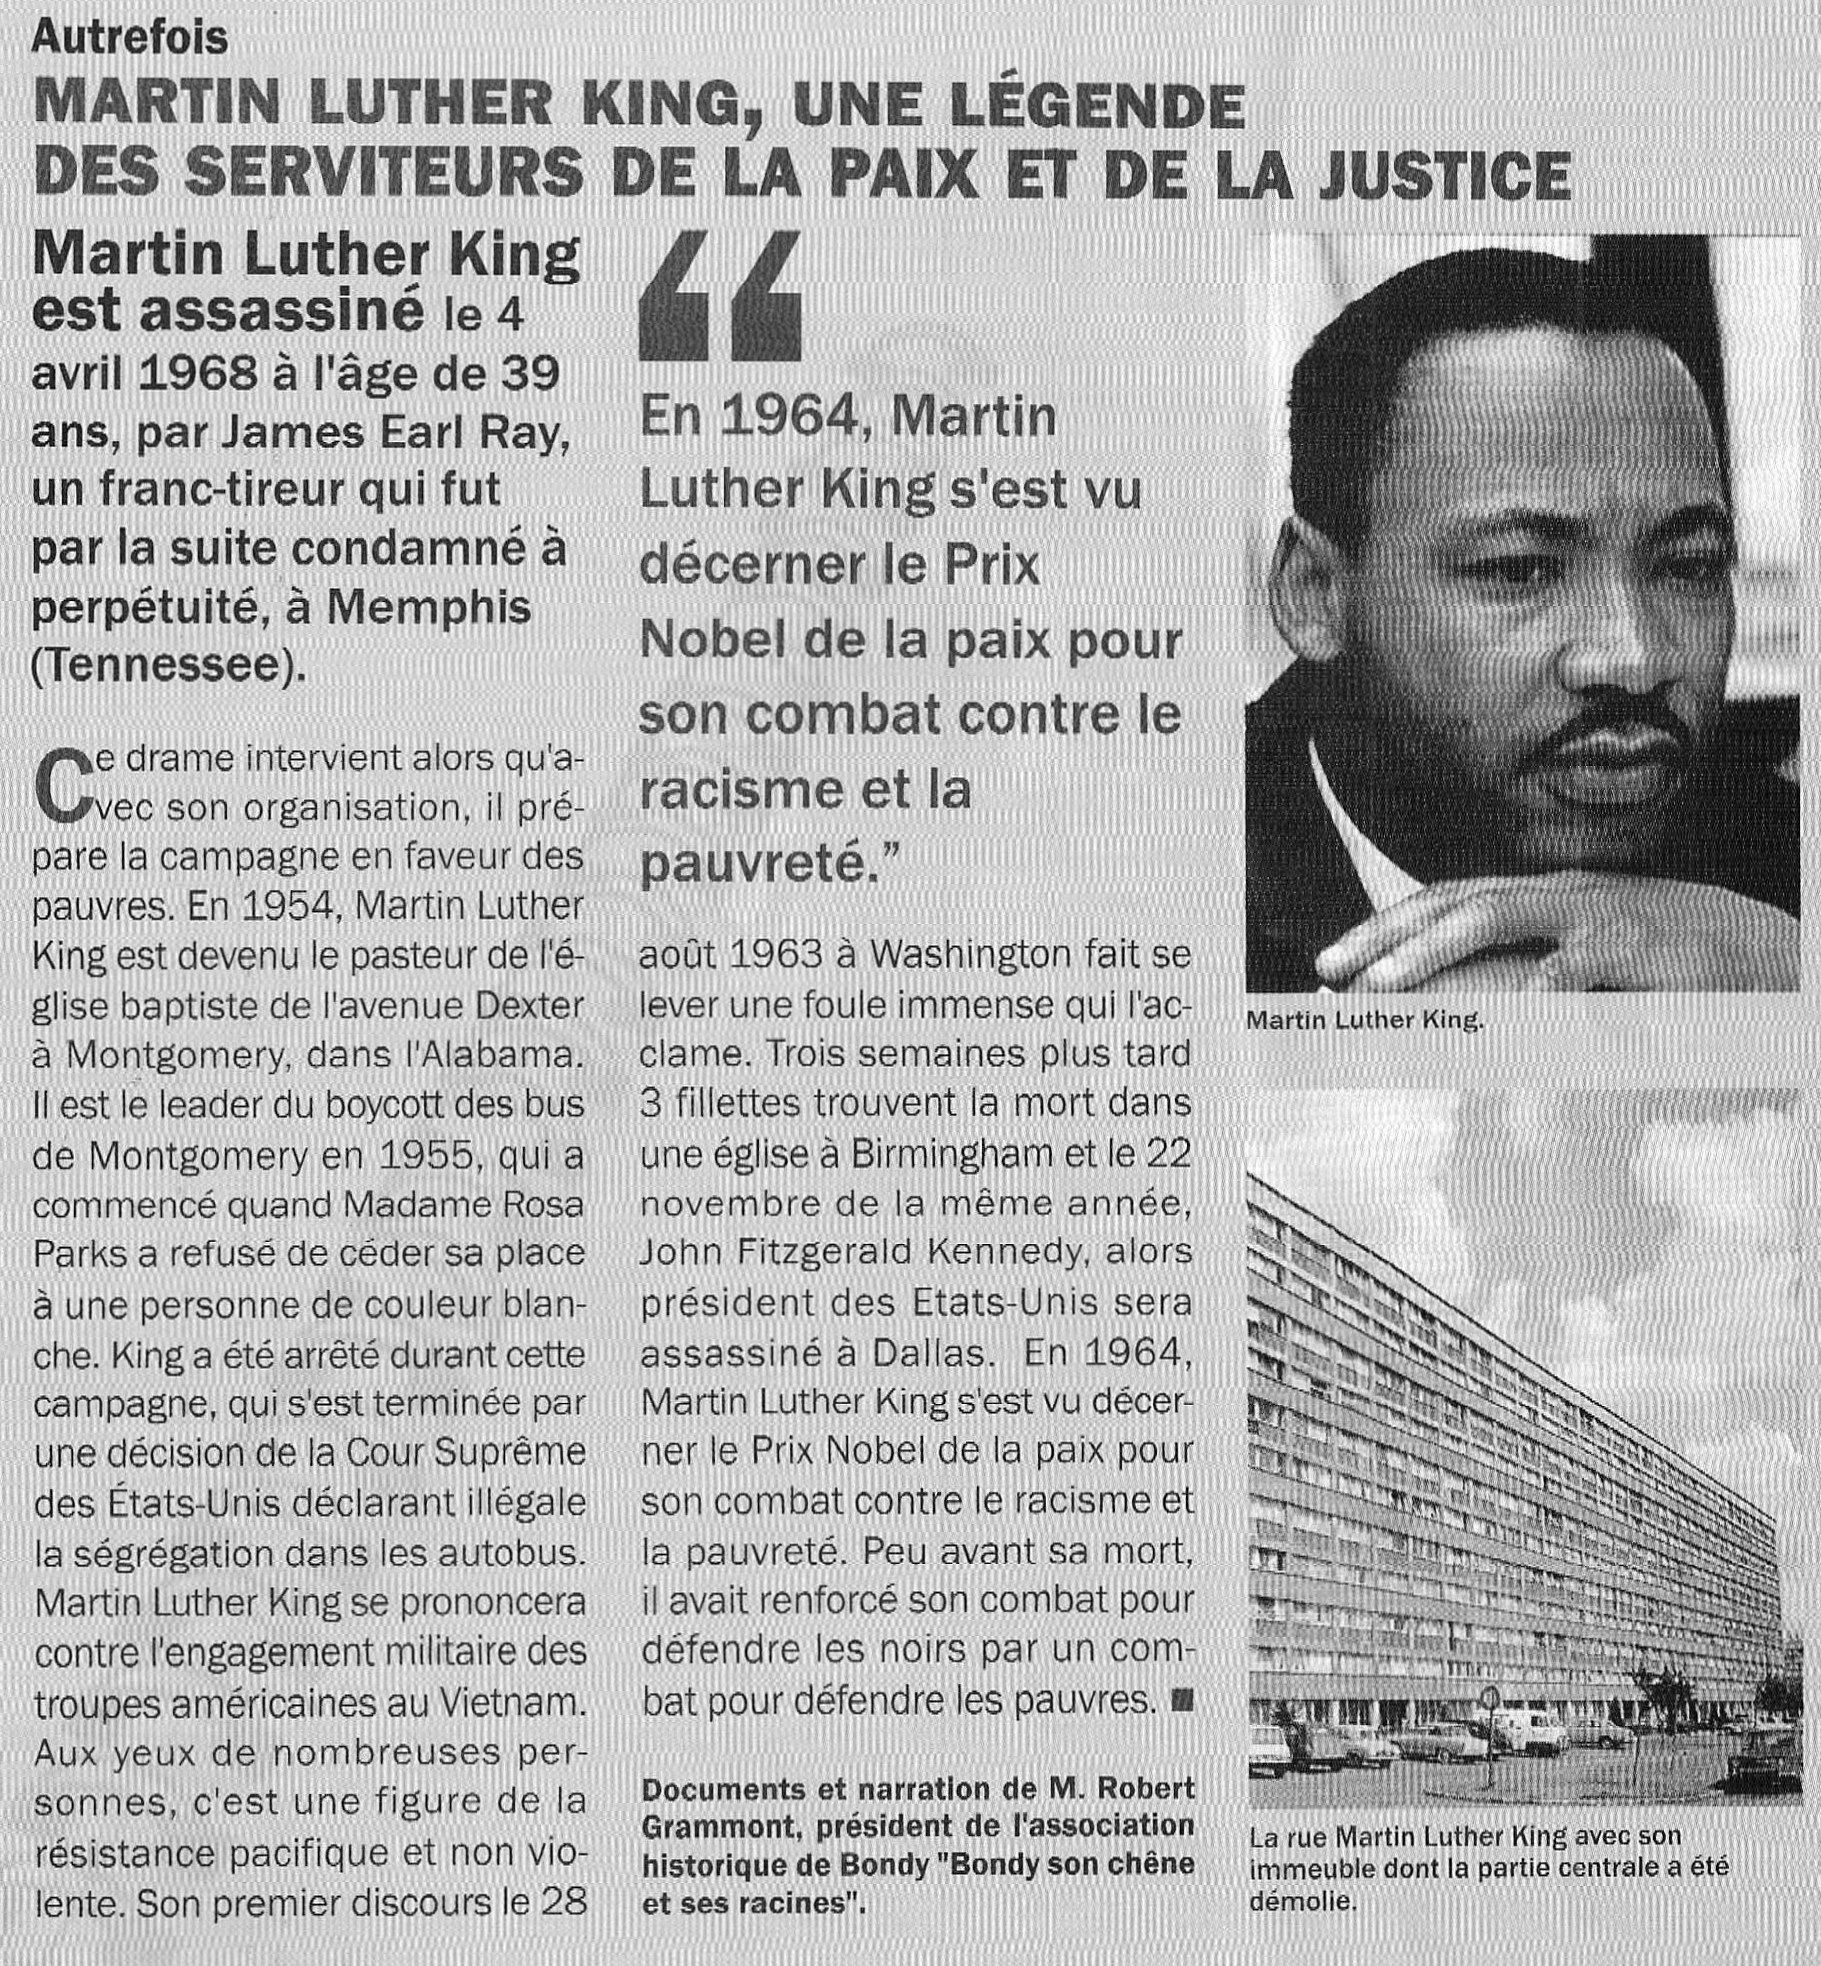 Rue Martin Luther King